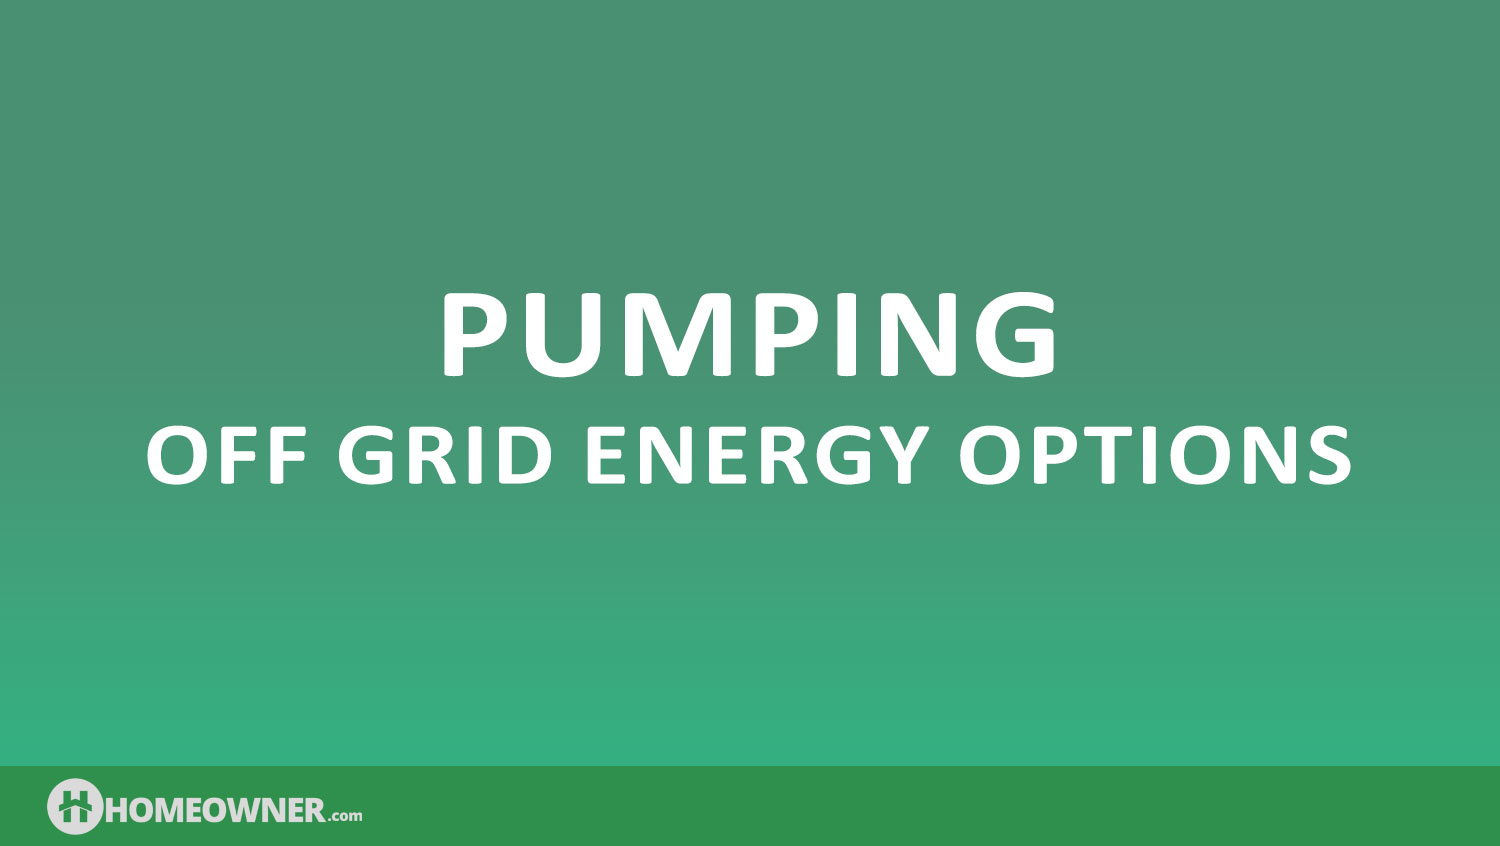 Pumping: Off Grid Energy Options